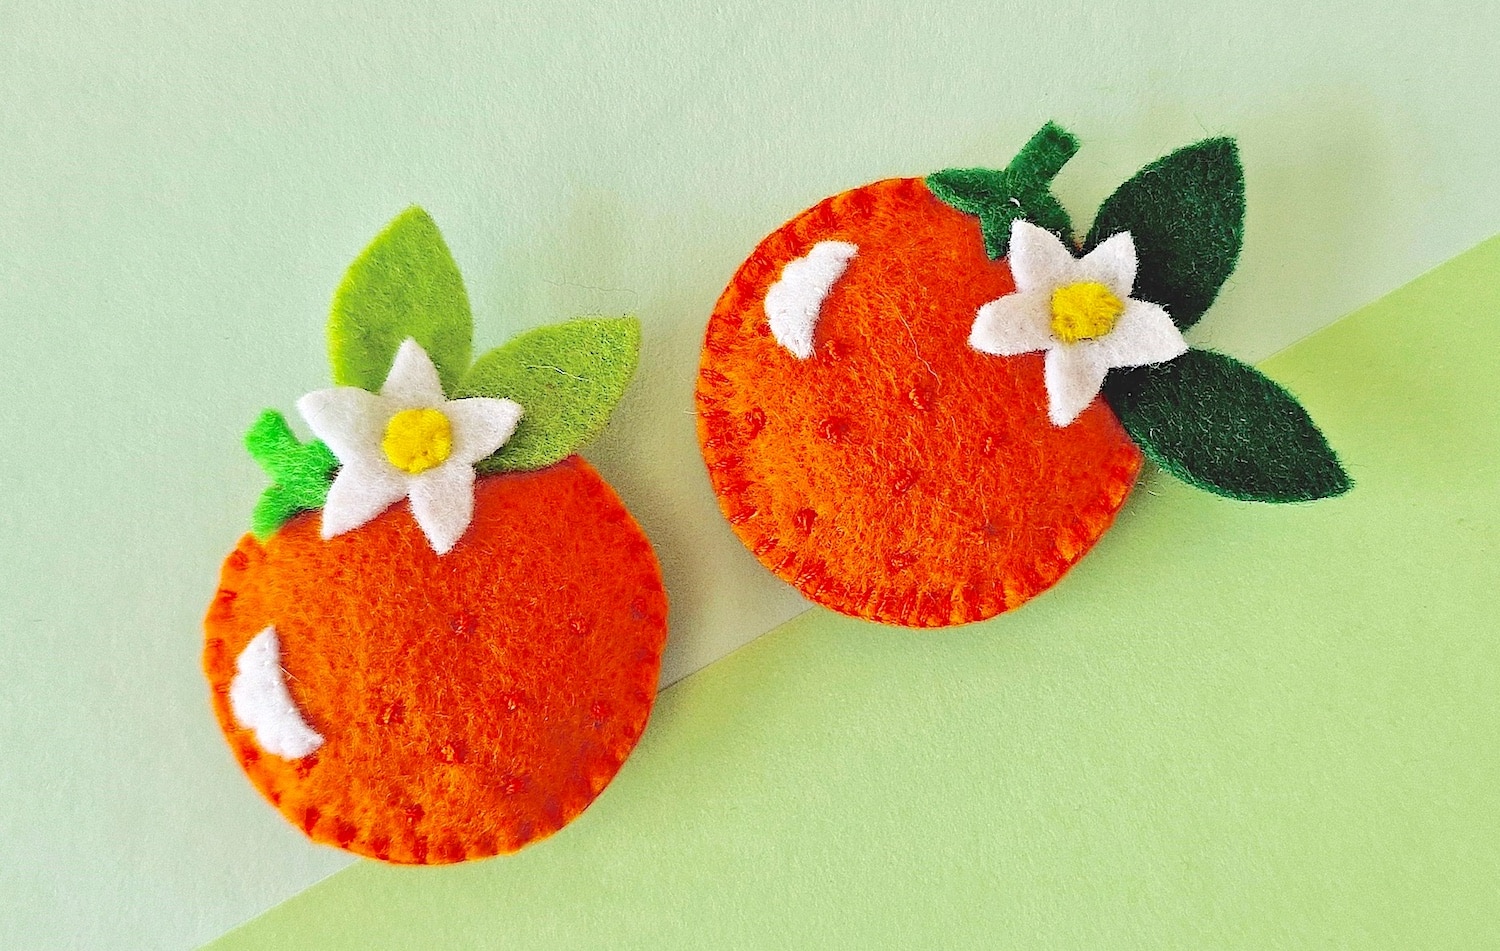 Handcrafted felt oranges with white flowers on a dual-toned background.